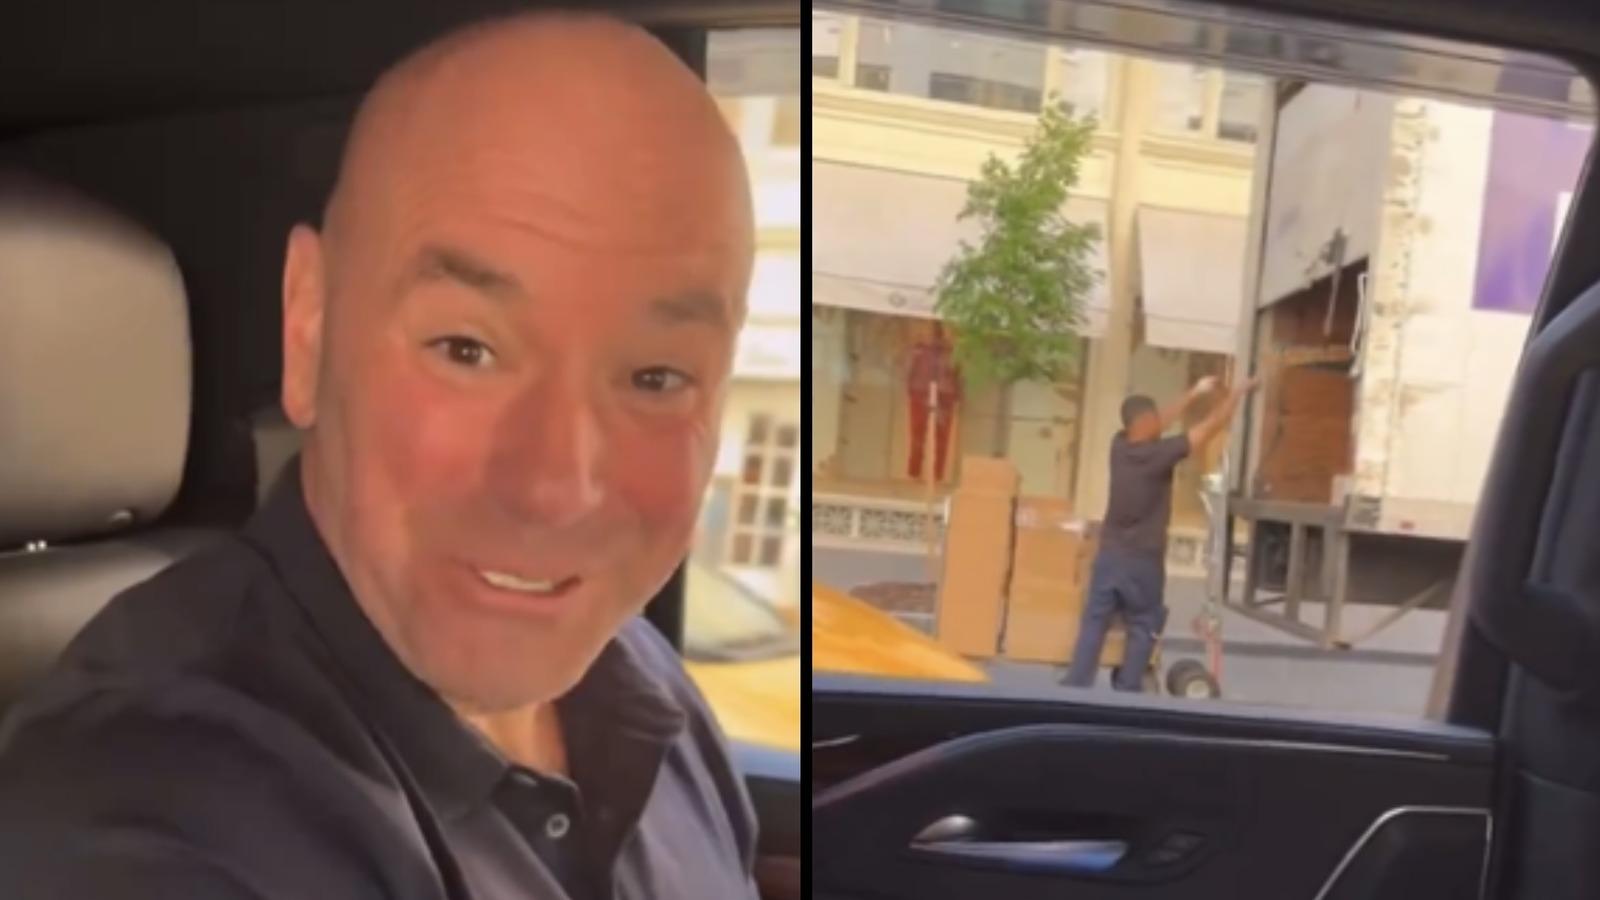 FedEx has fired a delivery driver following Dana White’s viral video